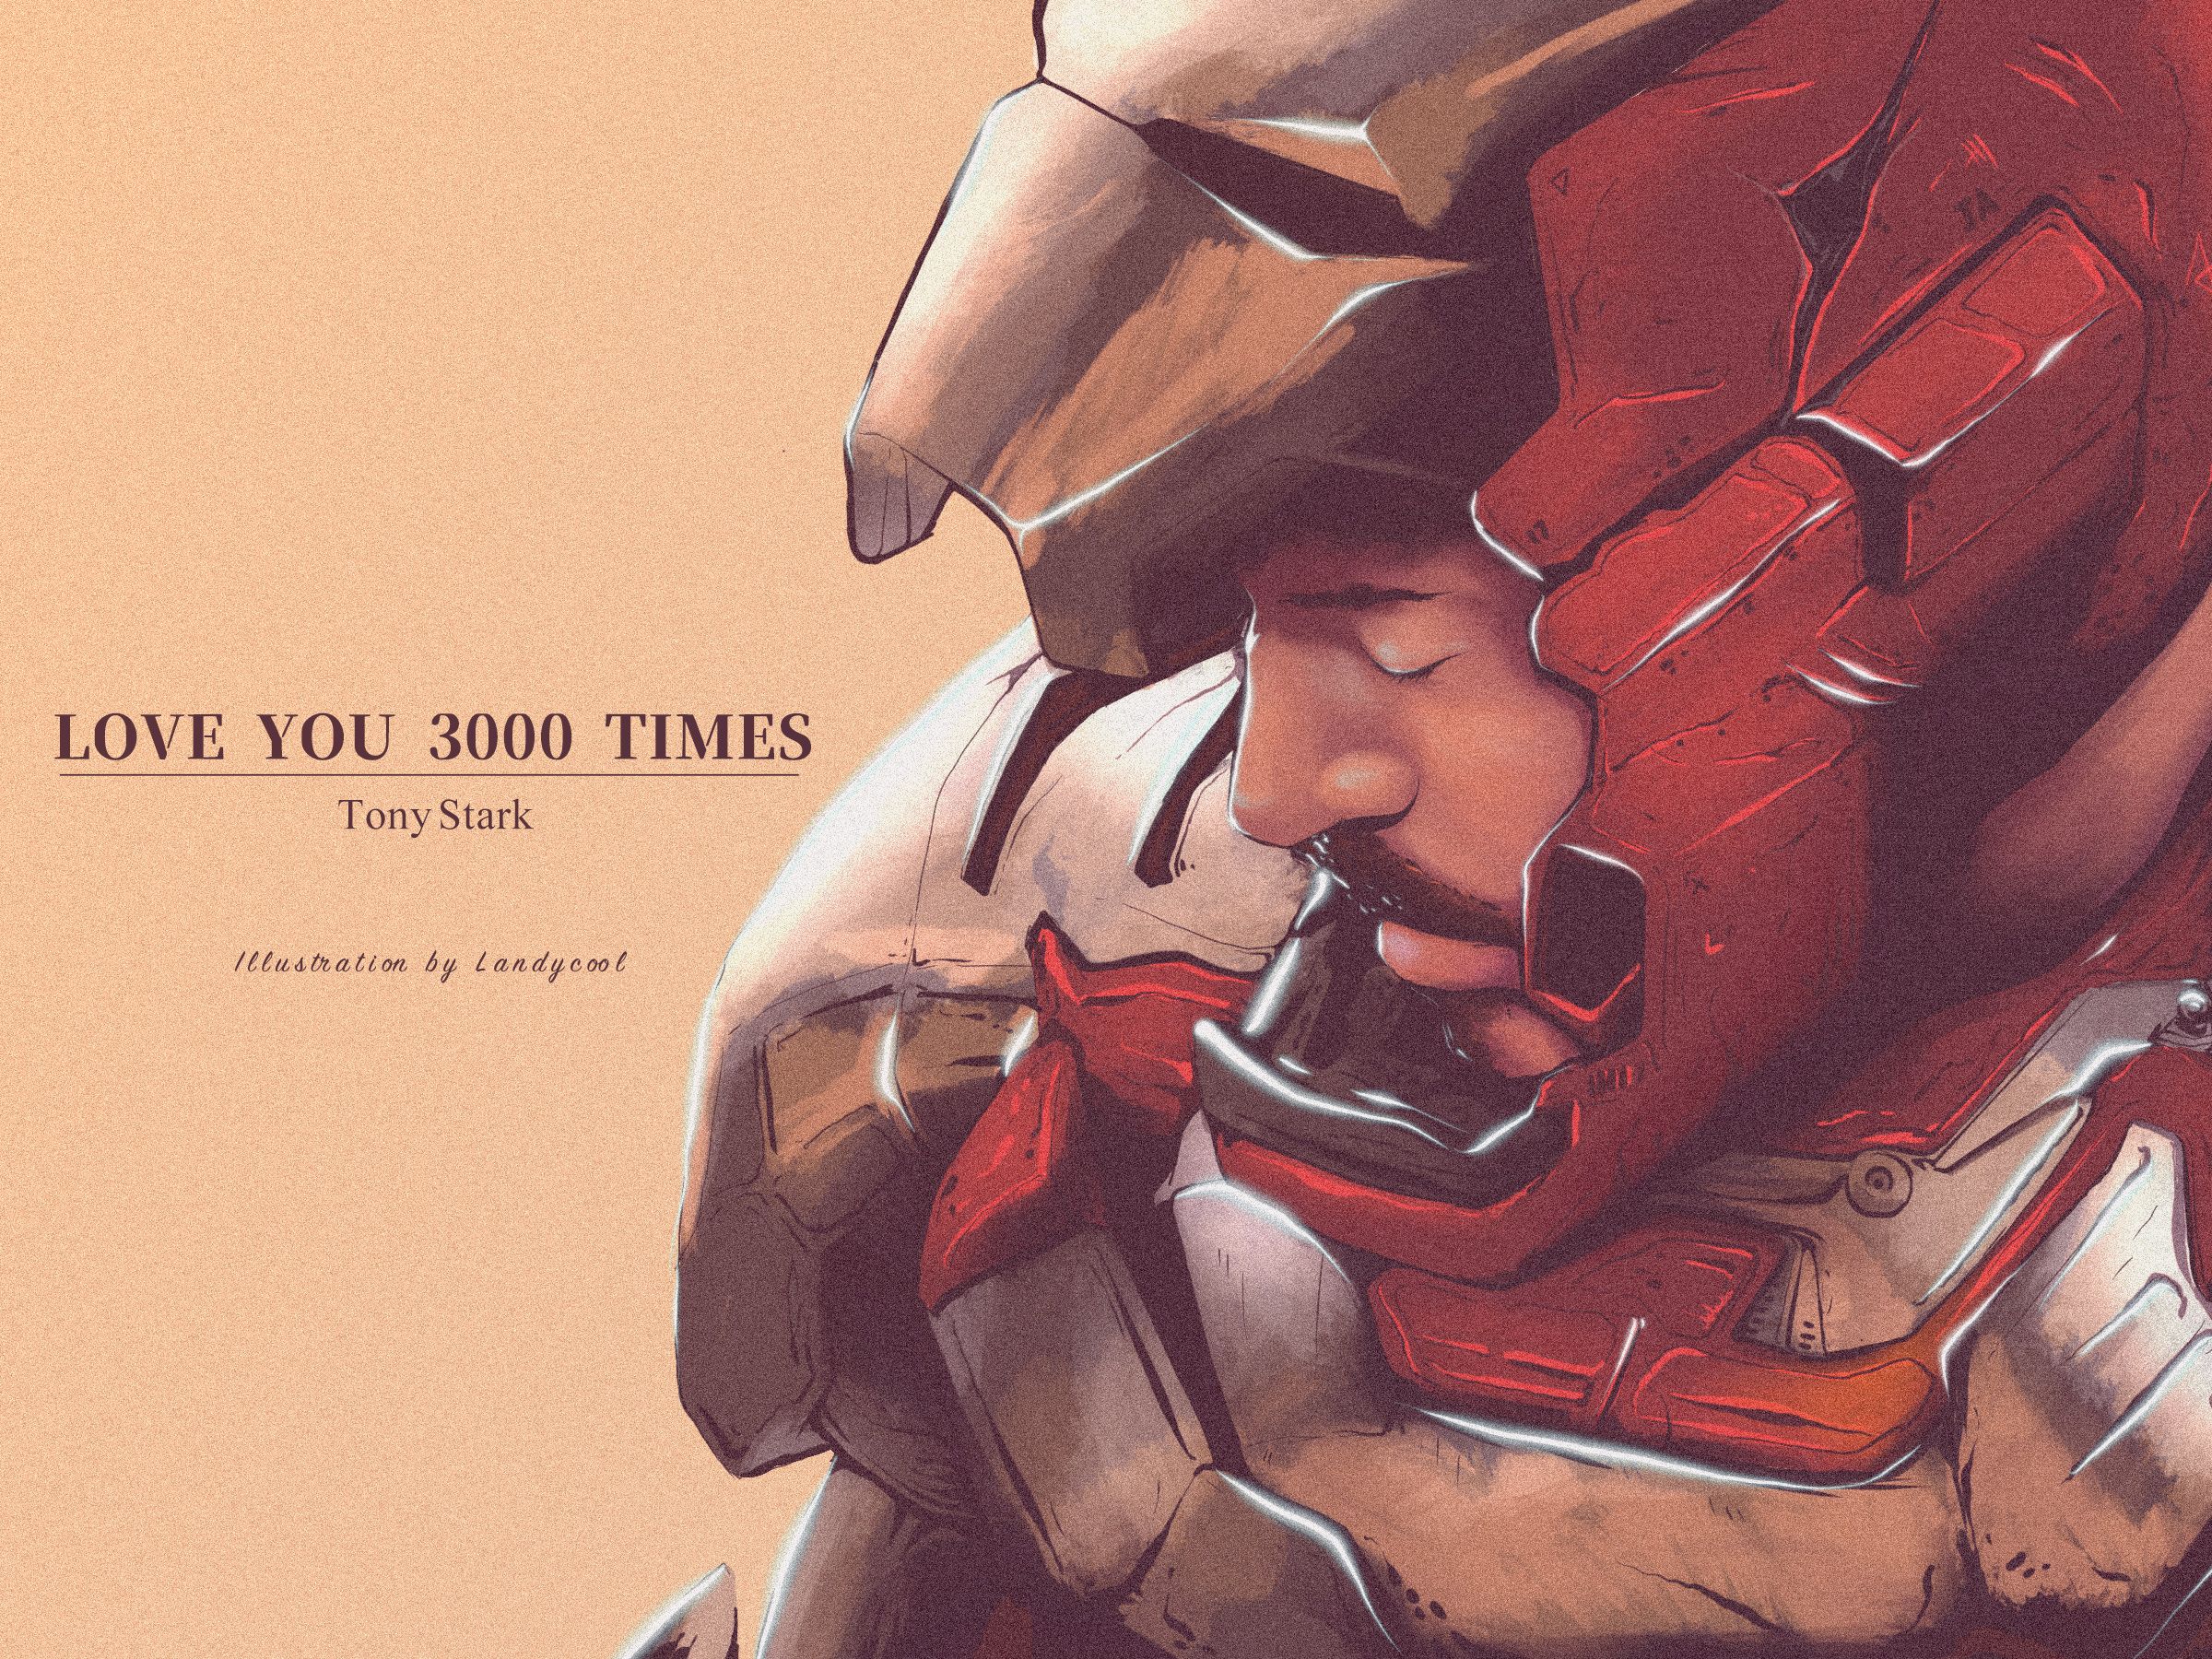 Love you 3000 times by LandyCooL for RaDesign on Dribbble.